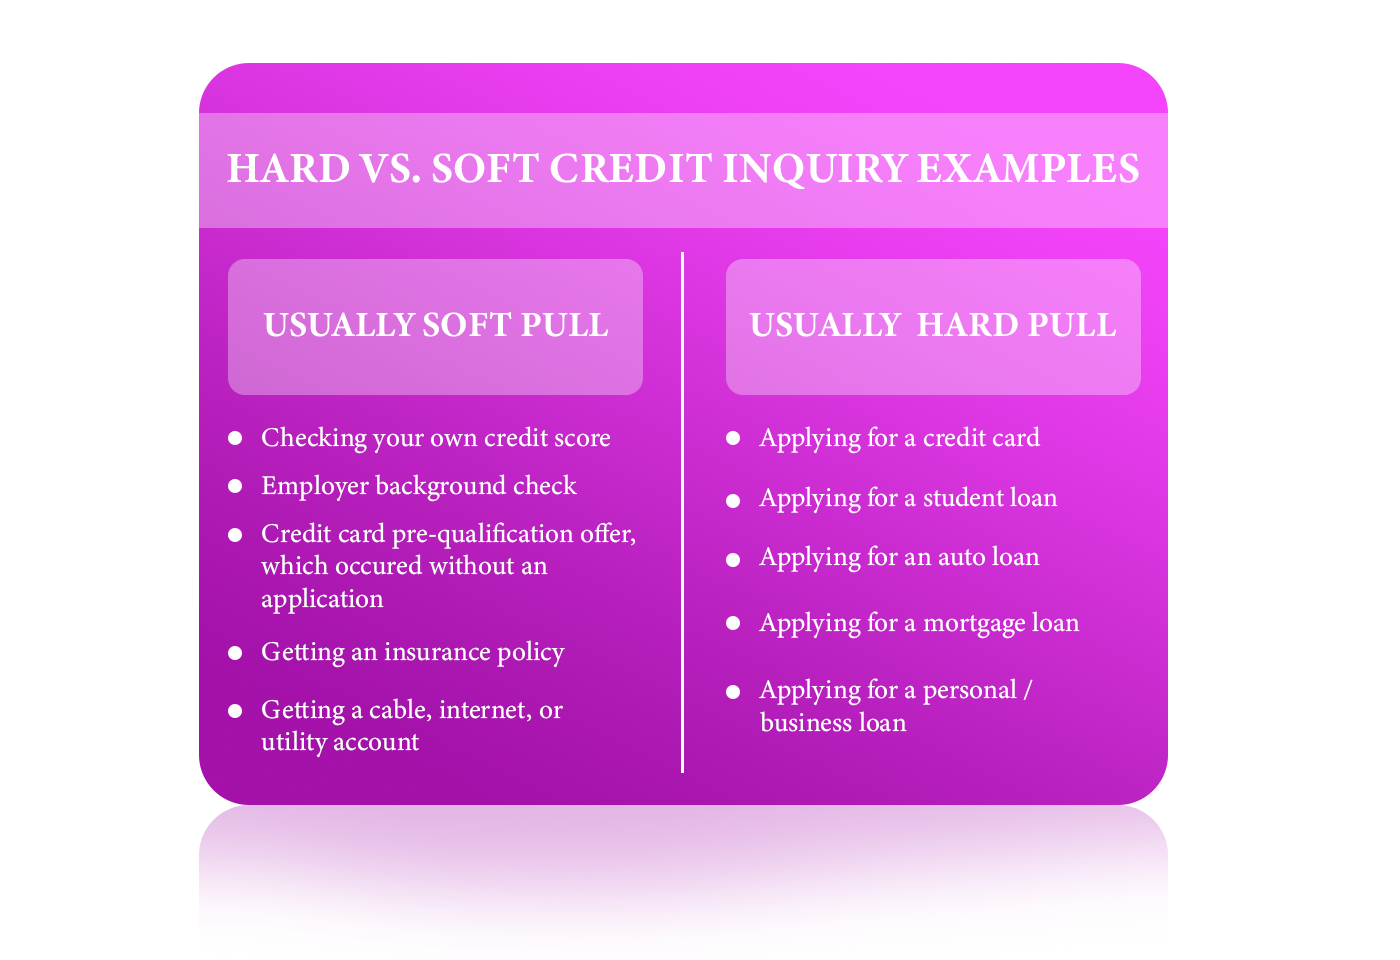 Hard vs soft credit inquiry examples